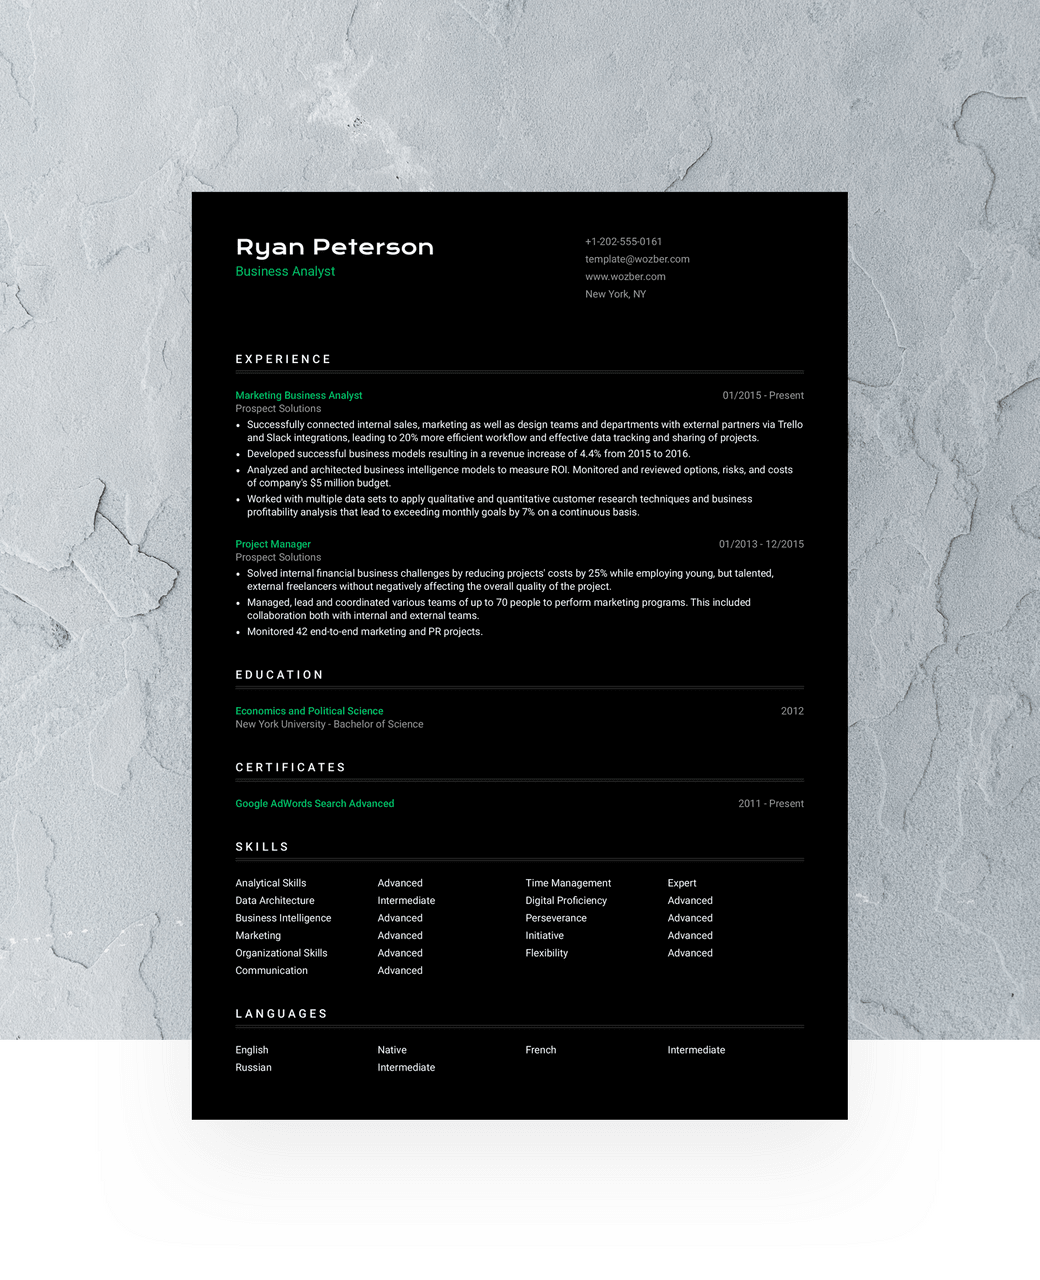 The most creative and unique CV template we offer.